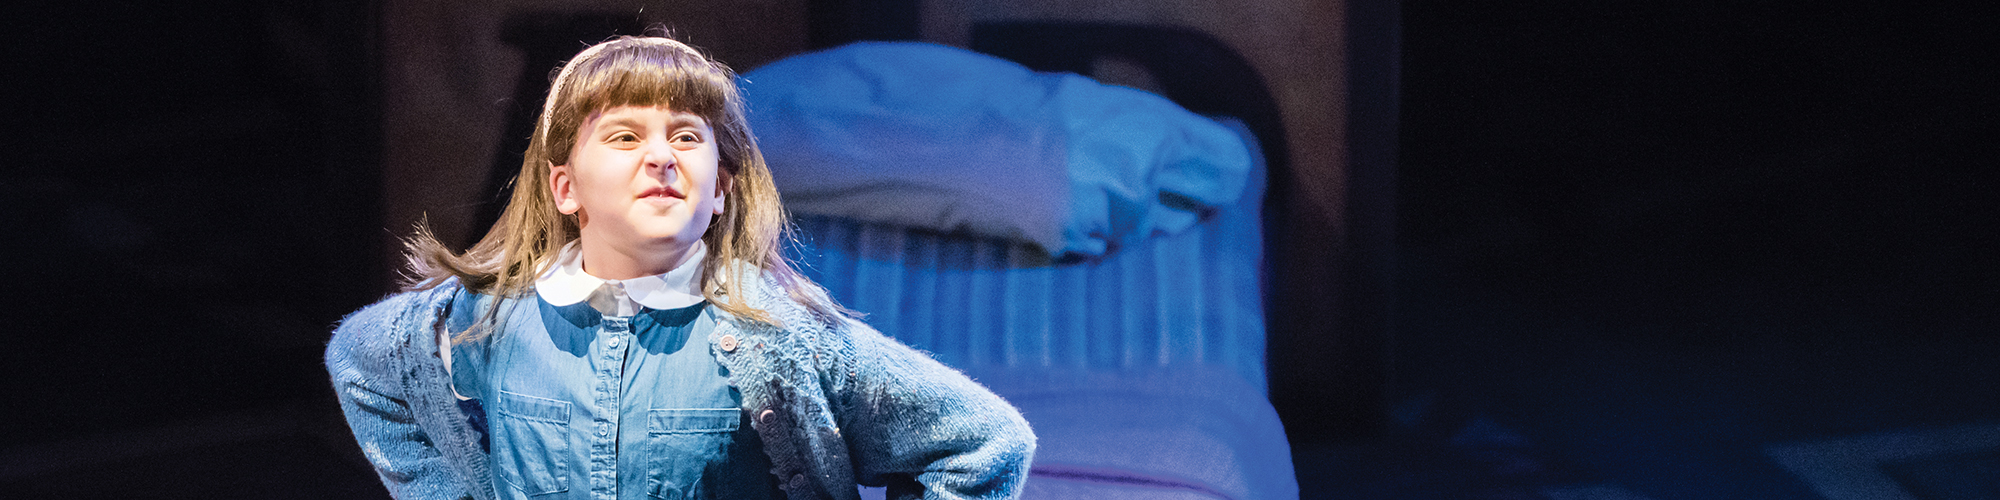 Image from First Stage's production of Roald Dahl's MATILDA The Musical